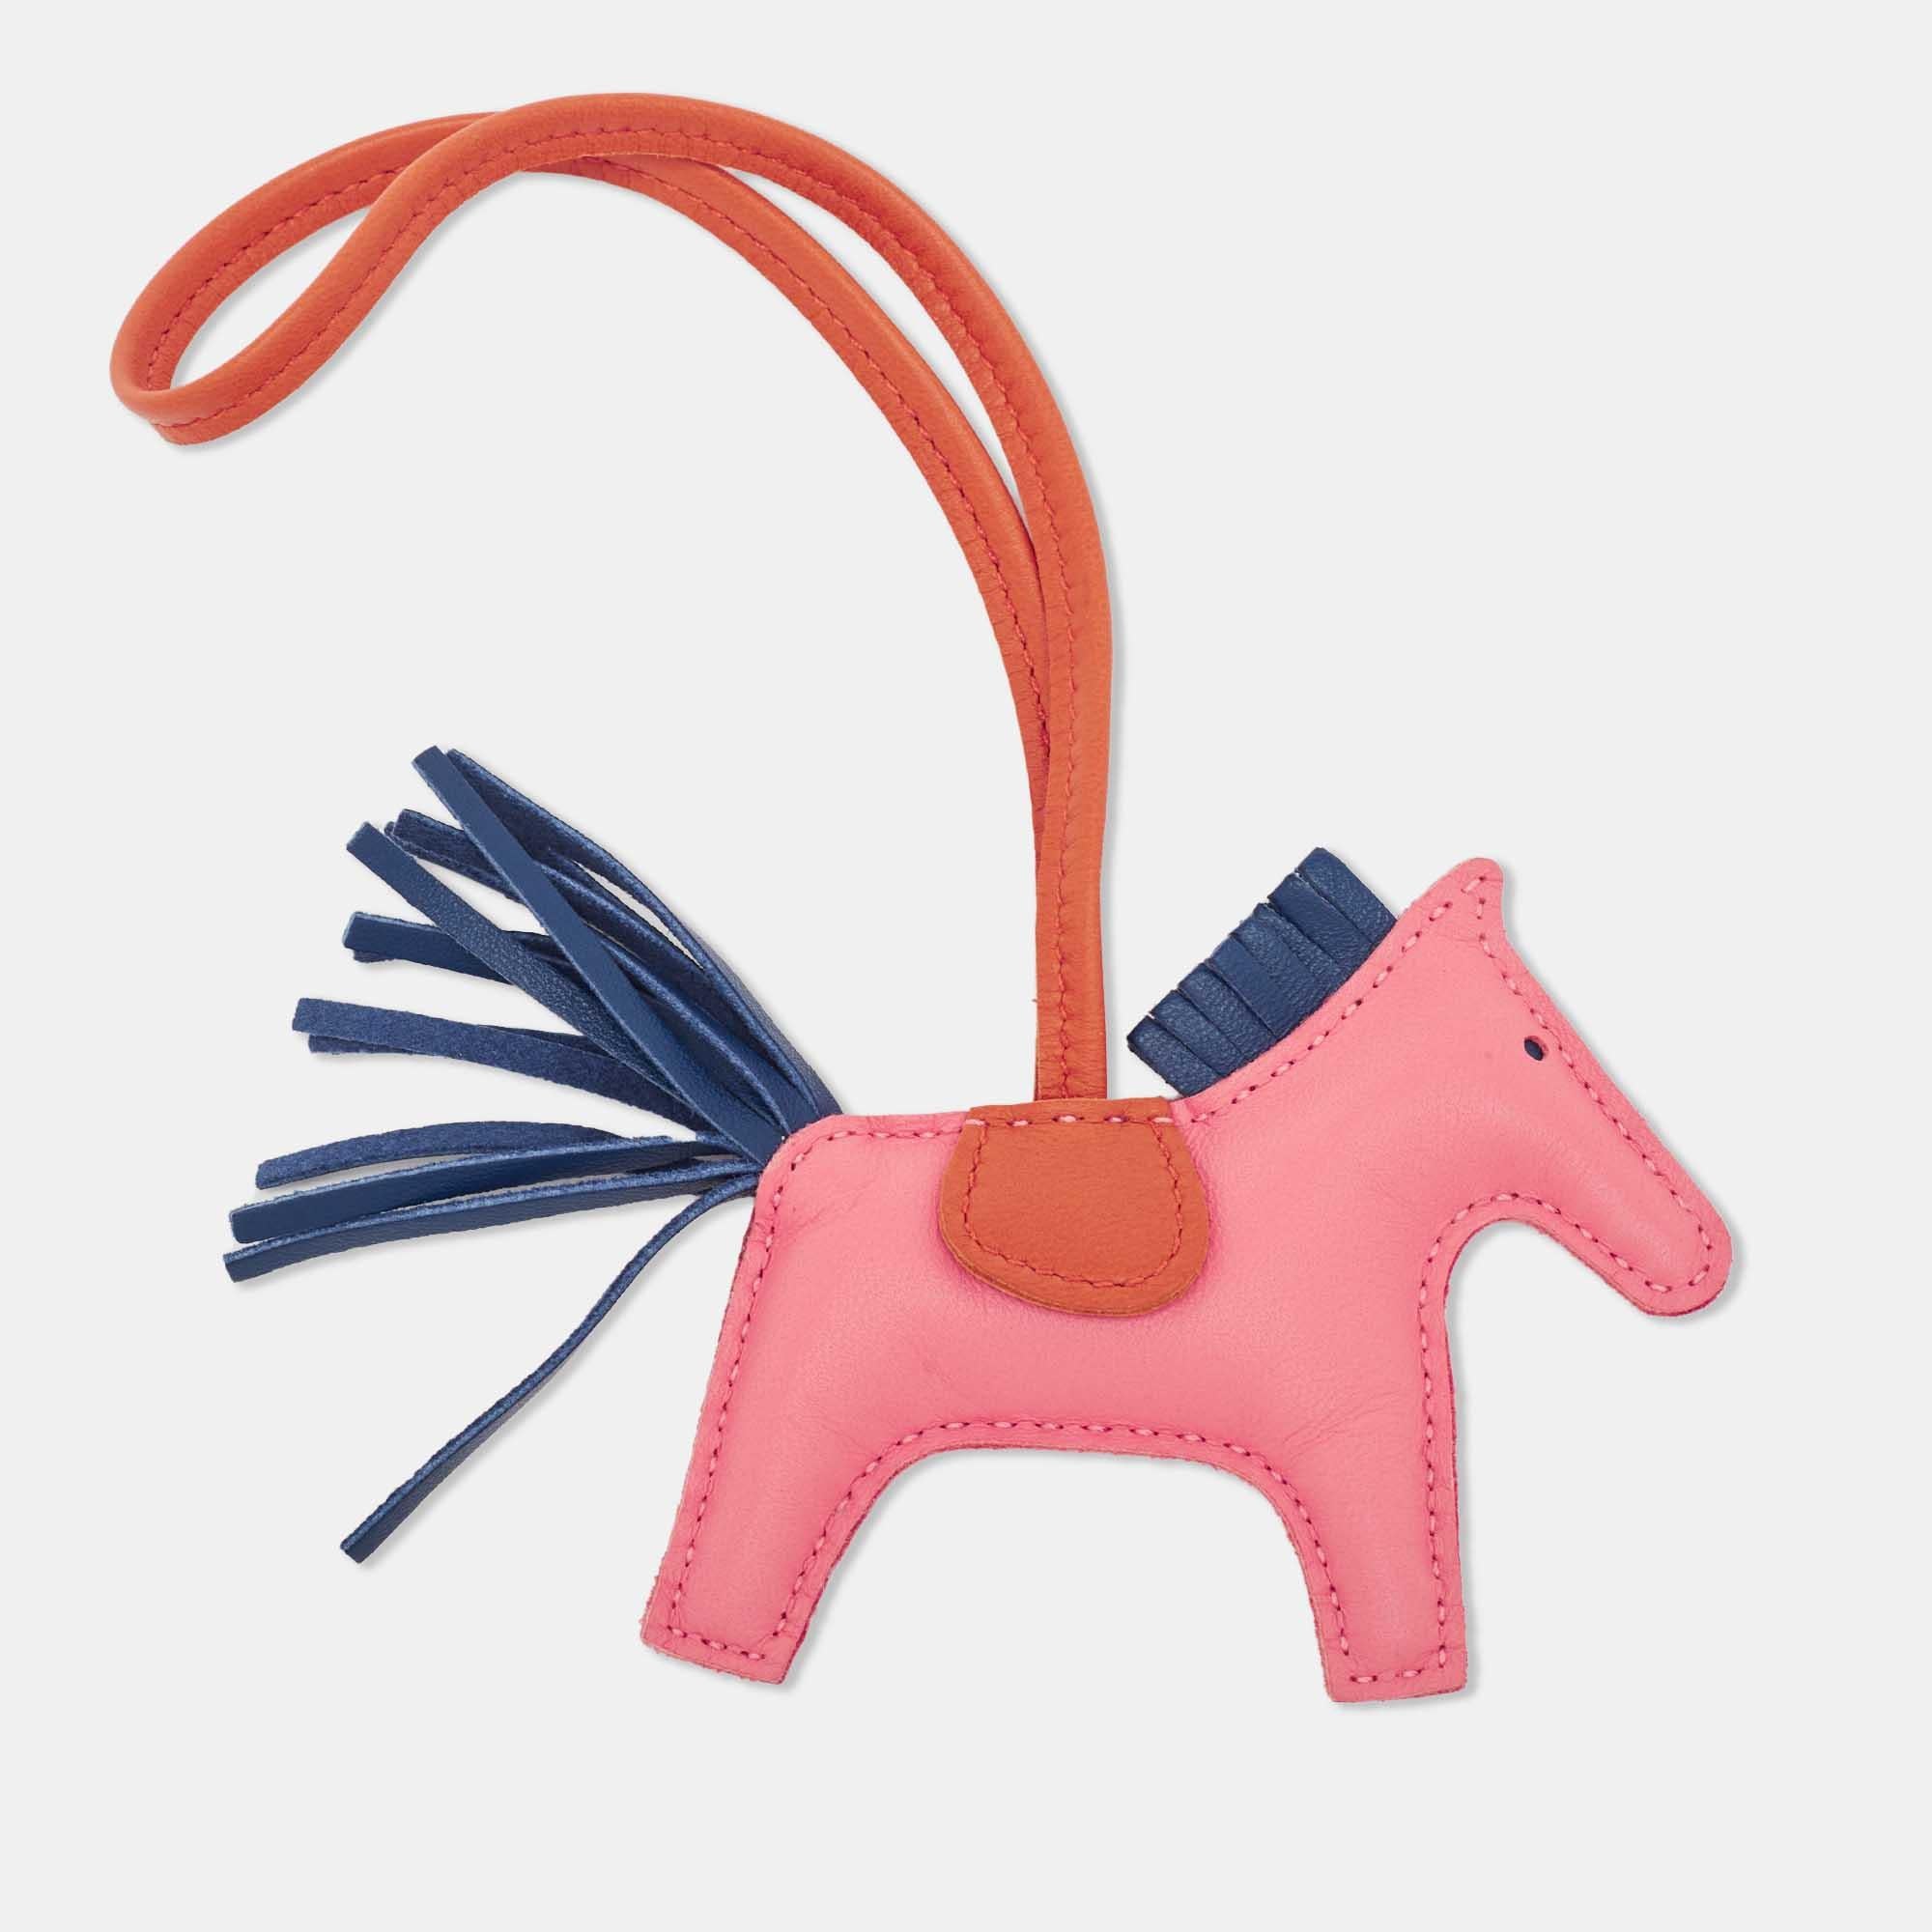 You know how much you love accessorizing, why not do the same for your bag? Glam up the bag with this Hermès Rodeo bag charm shaped like a horse with a fringed mane and tail reflecting the label's equestrian roots. Made out of leather in lovely